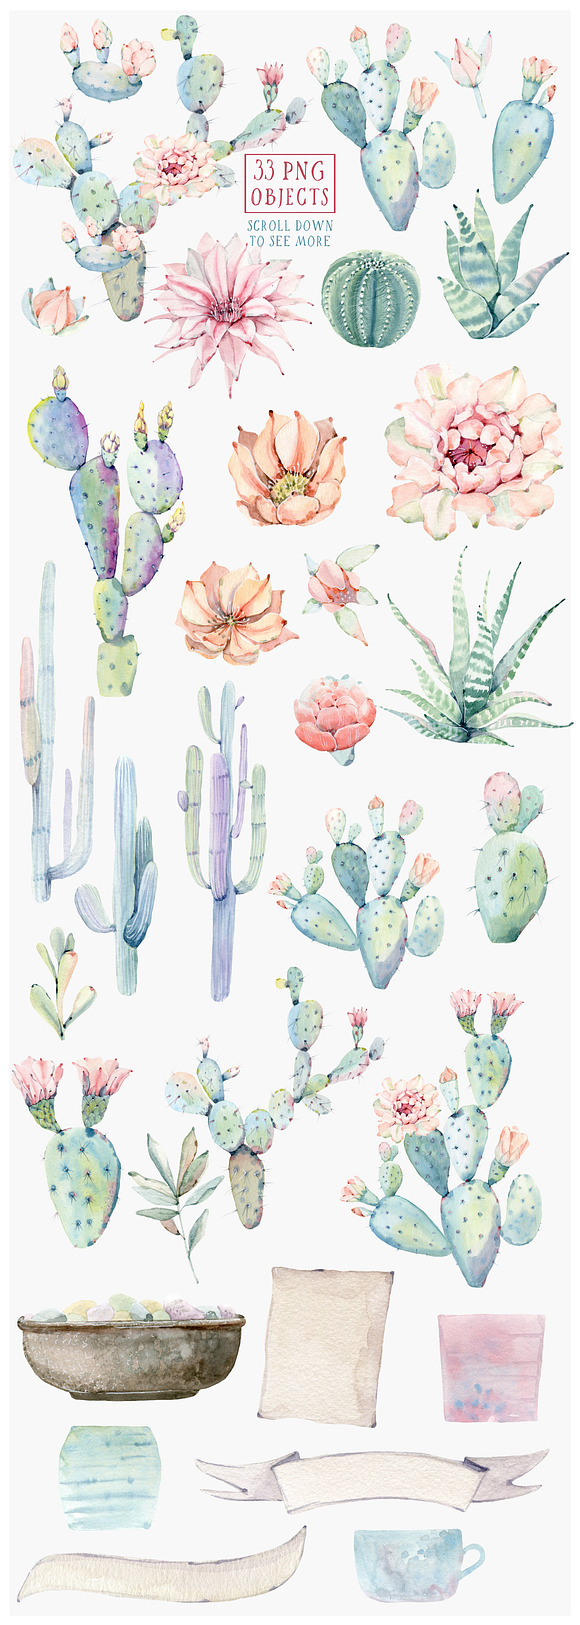 CACTUSES again and again in Illustrations - product preview 1